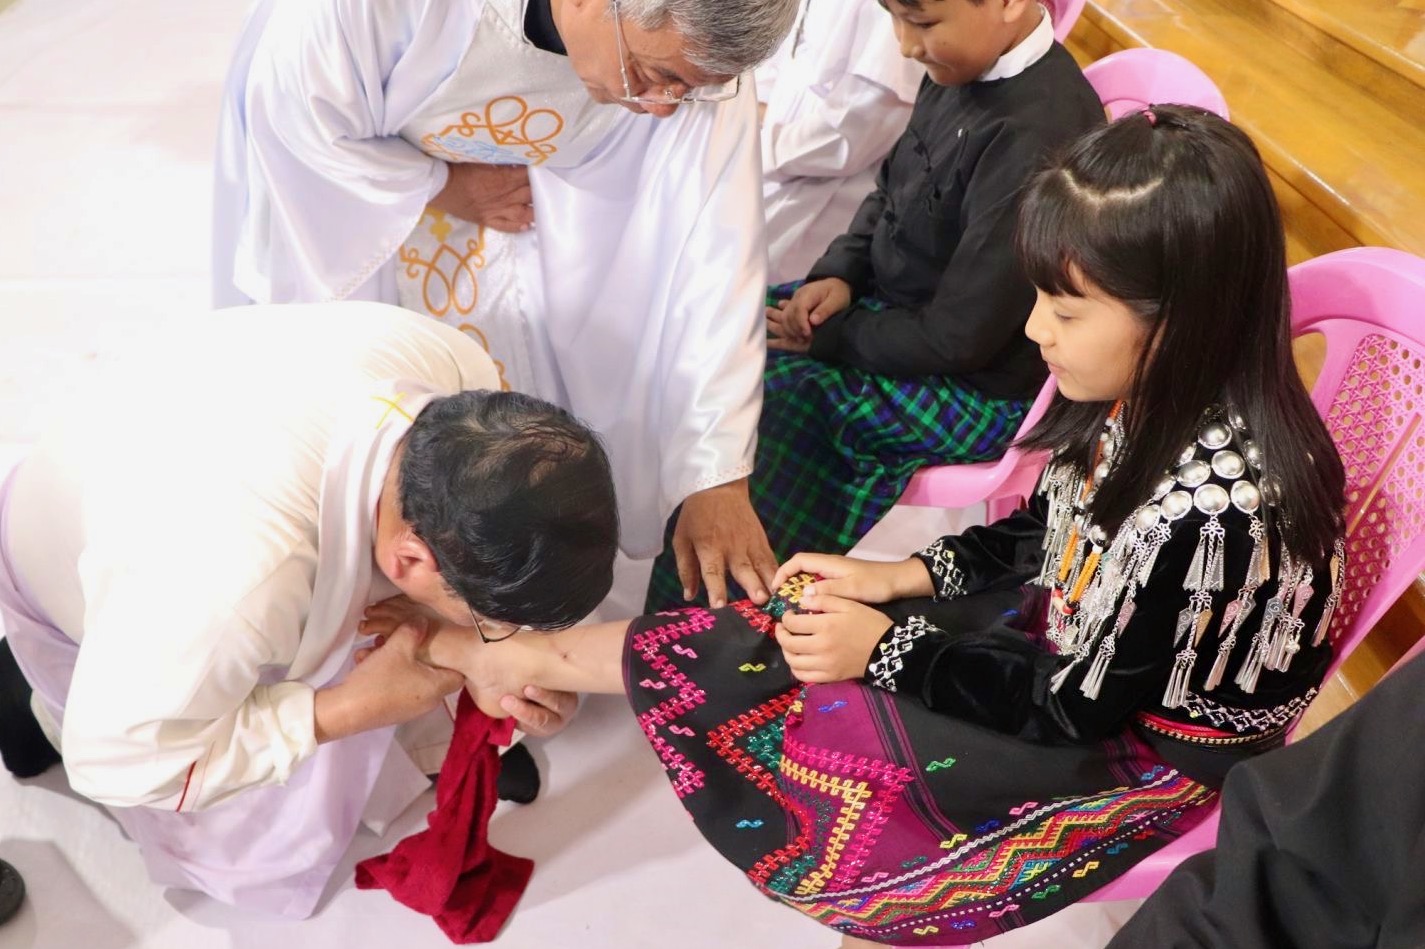 Cardinal Charles Maung Bo washing the feet of a young girl wearing indigenous clothing